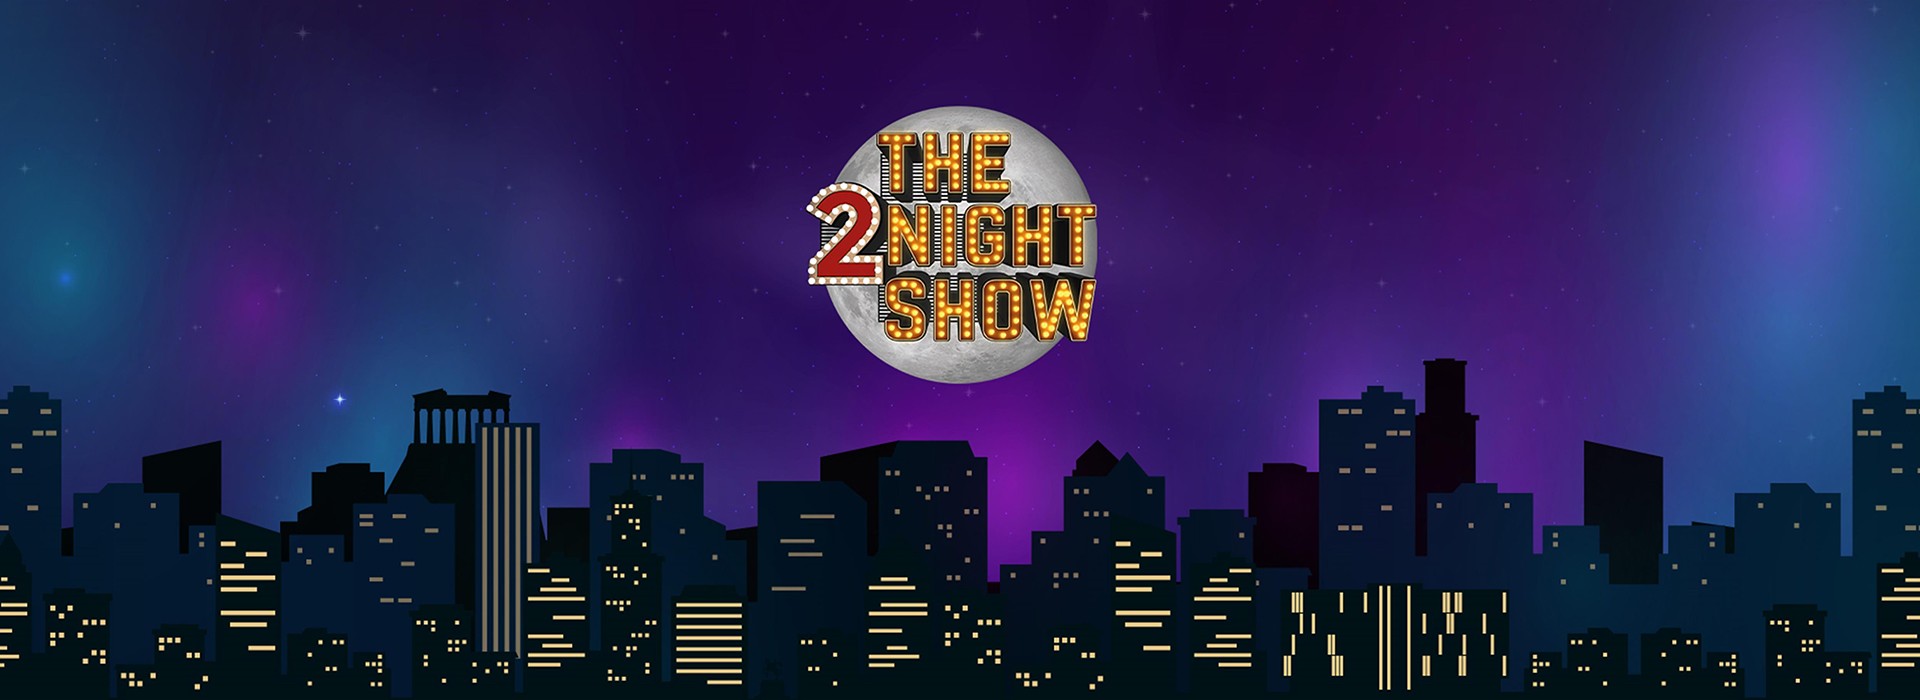 THE 2NIGHT SHOW 